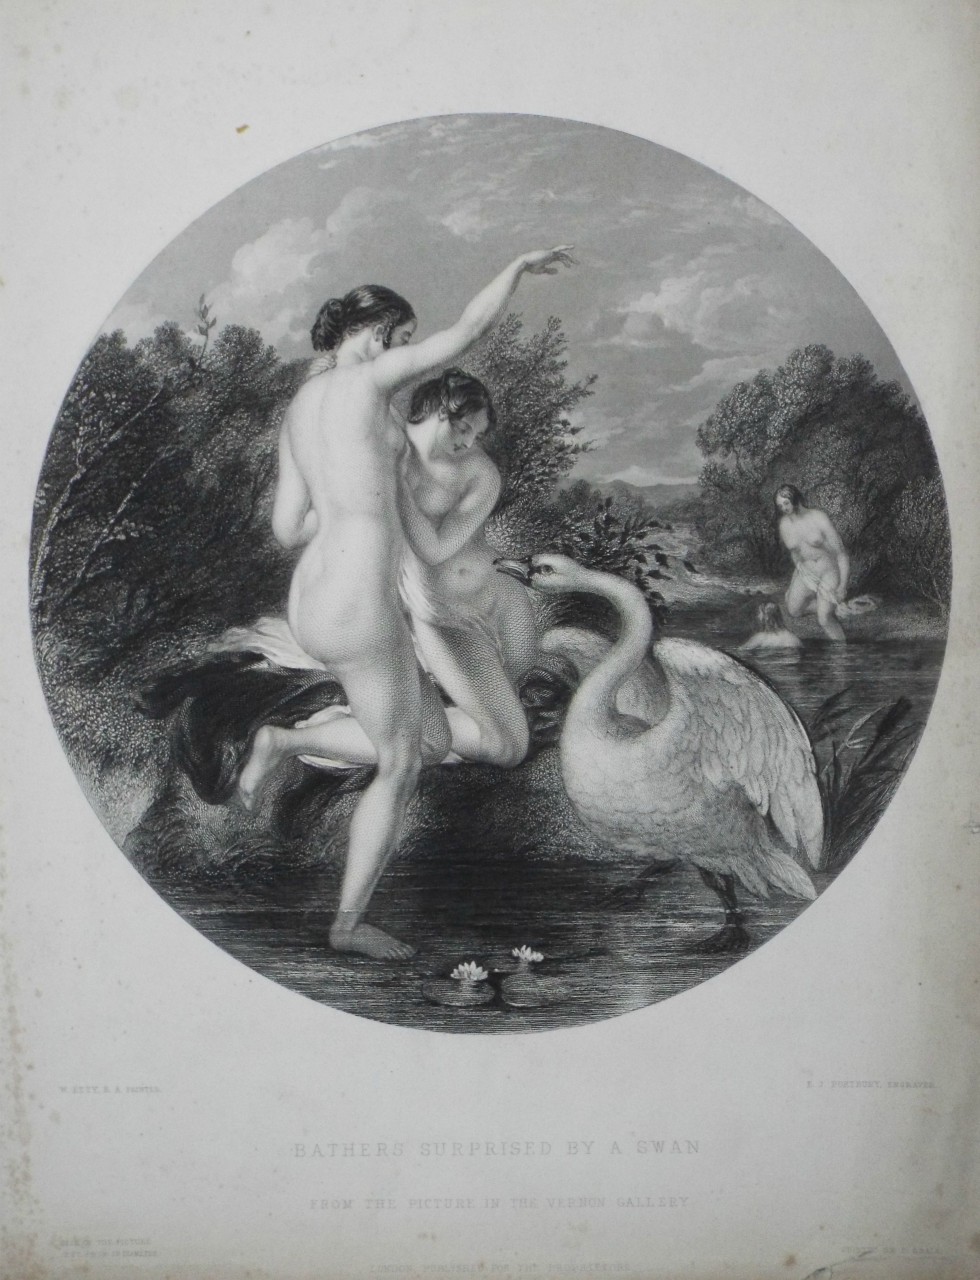 Print - Bathers Surprised by a Swan.